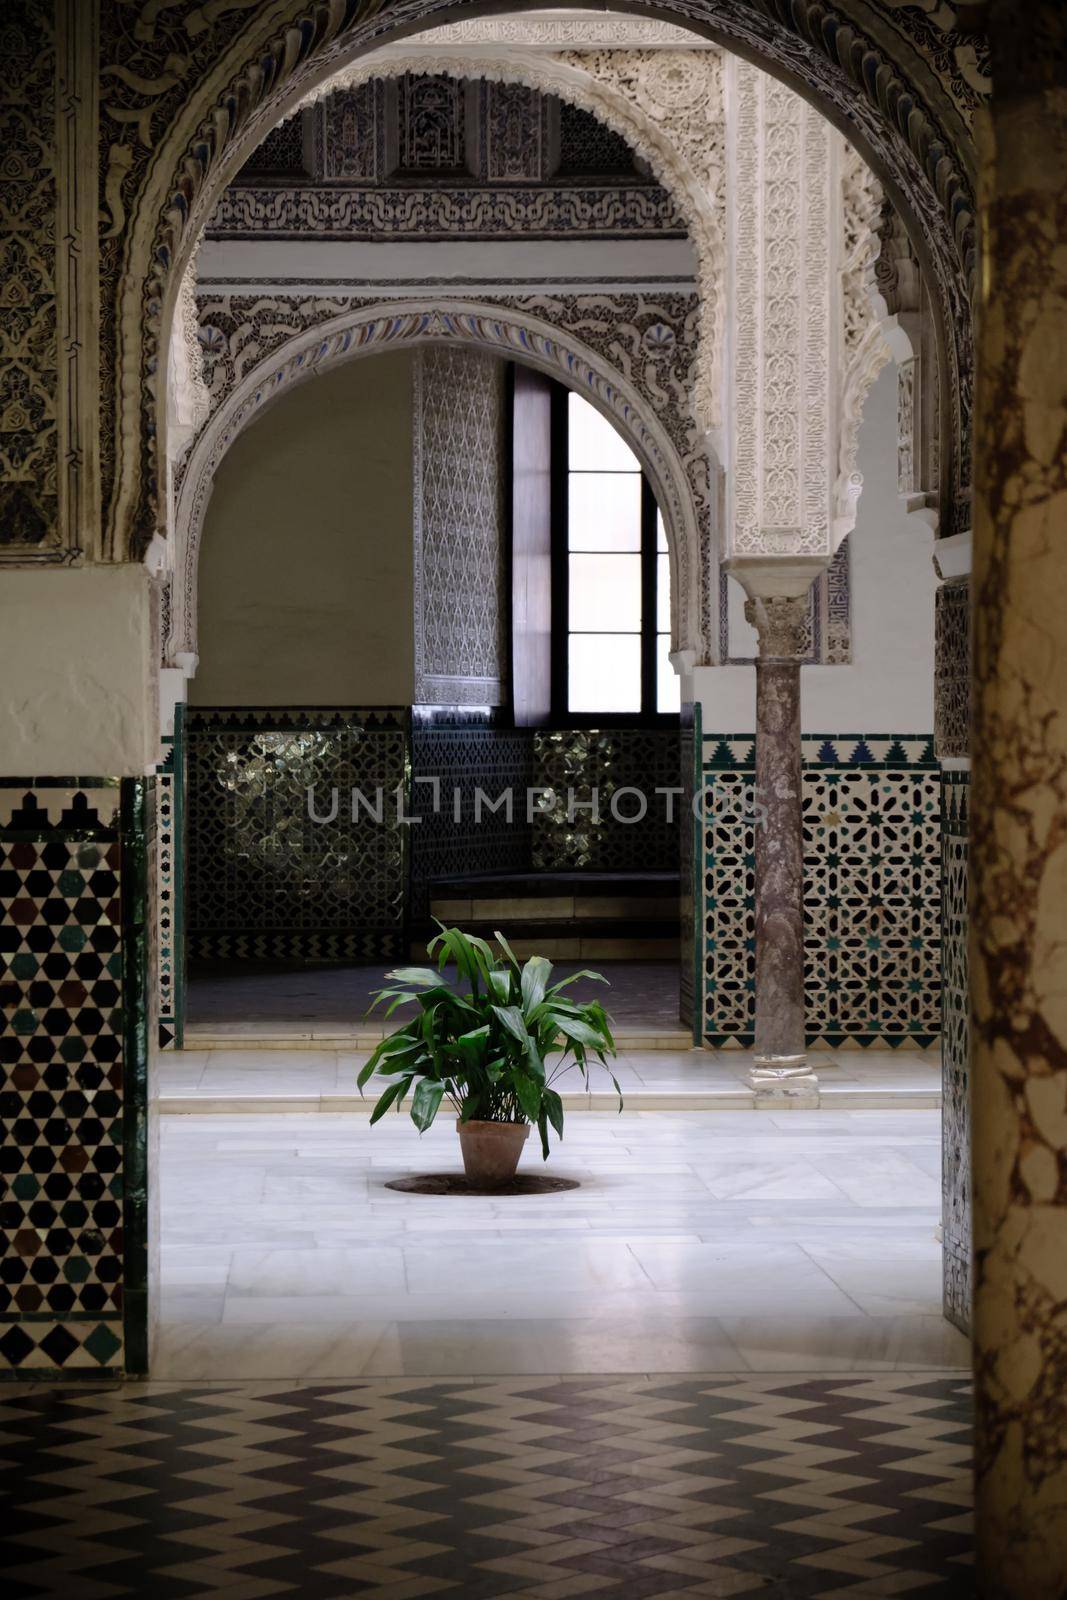 April 2019 - Seville Spain - Interior view of courtyard of Royal Alcazar with plant. by Sandronize